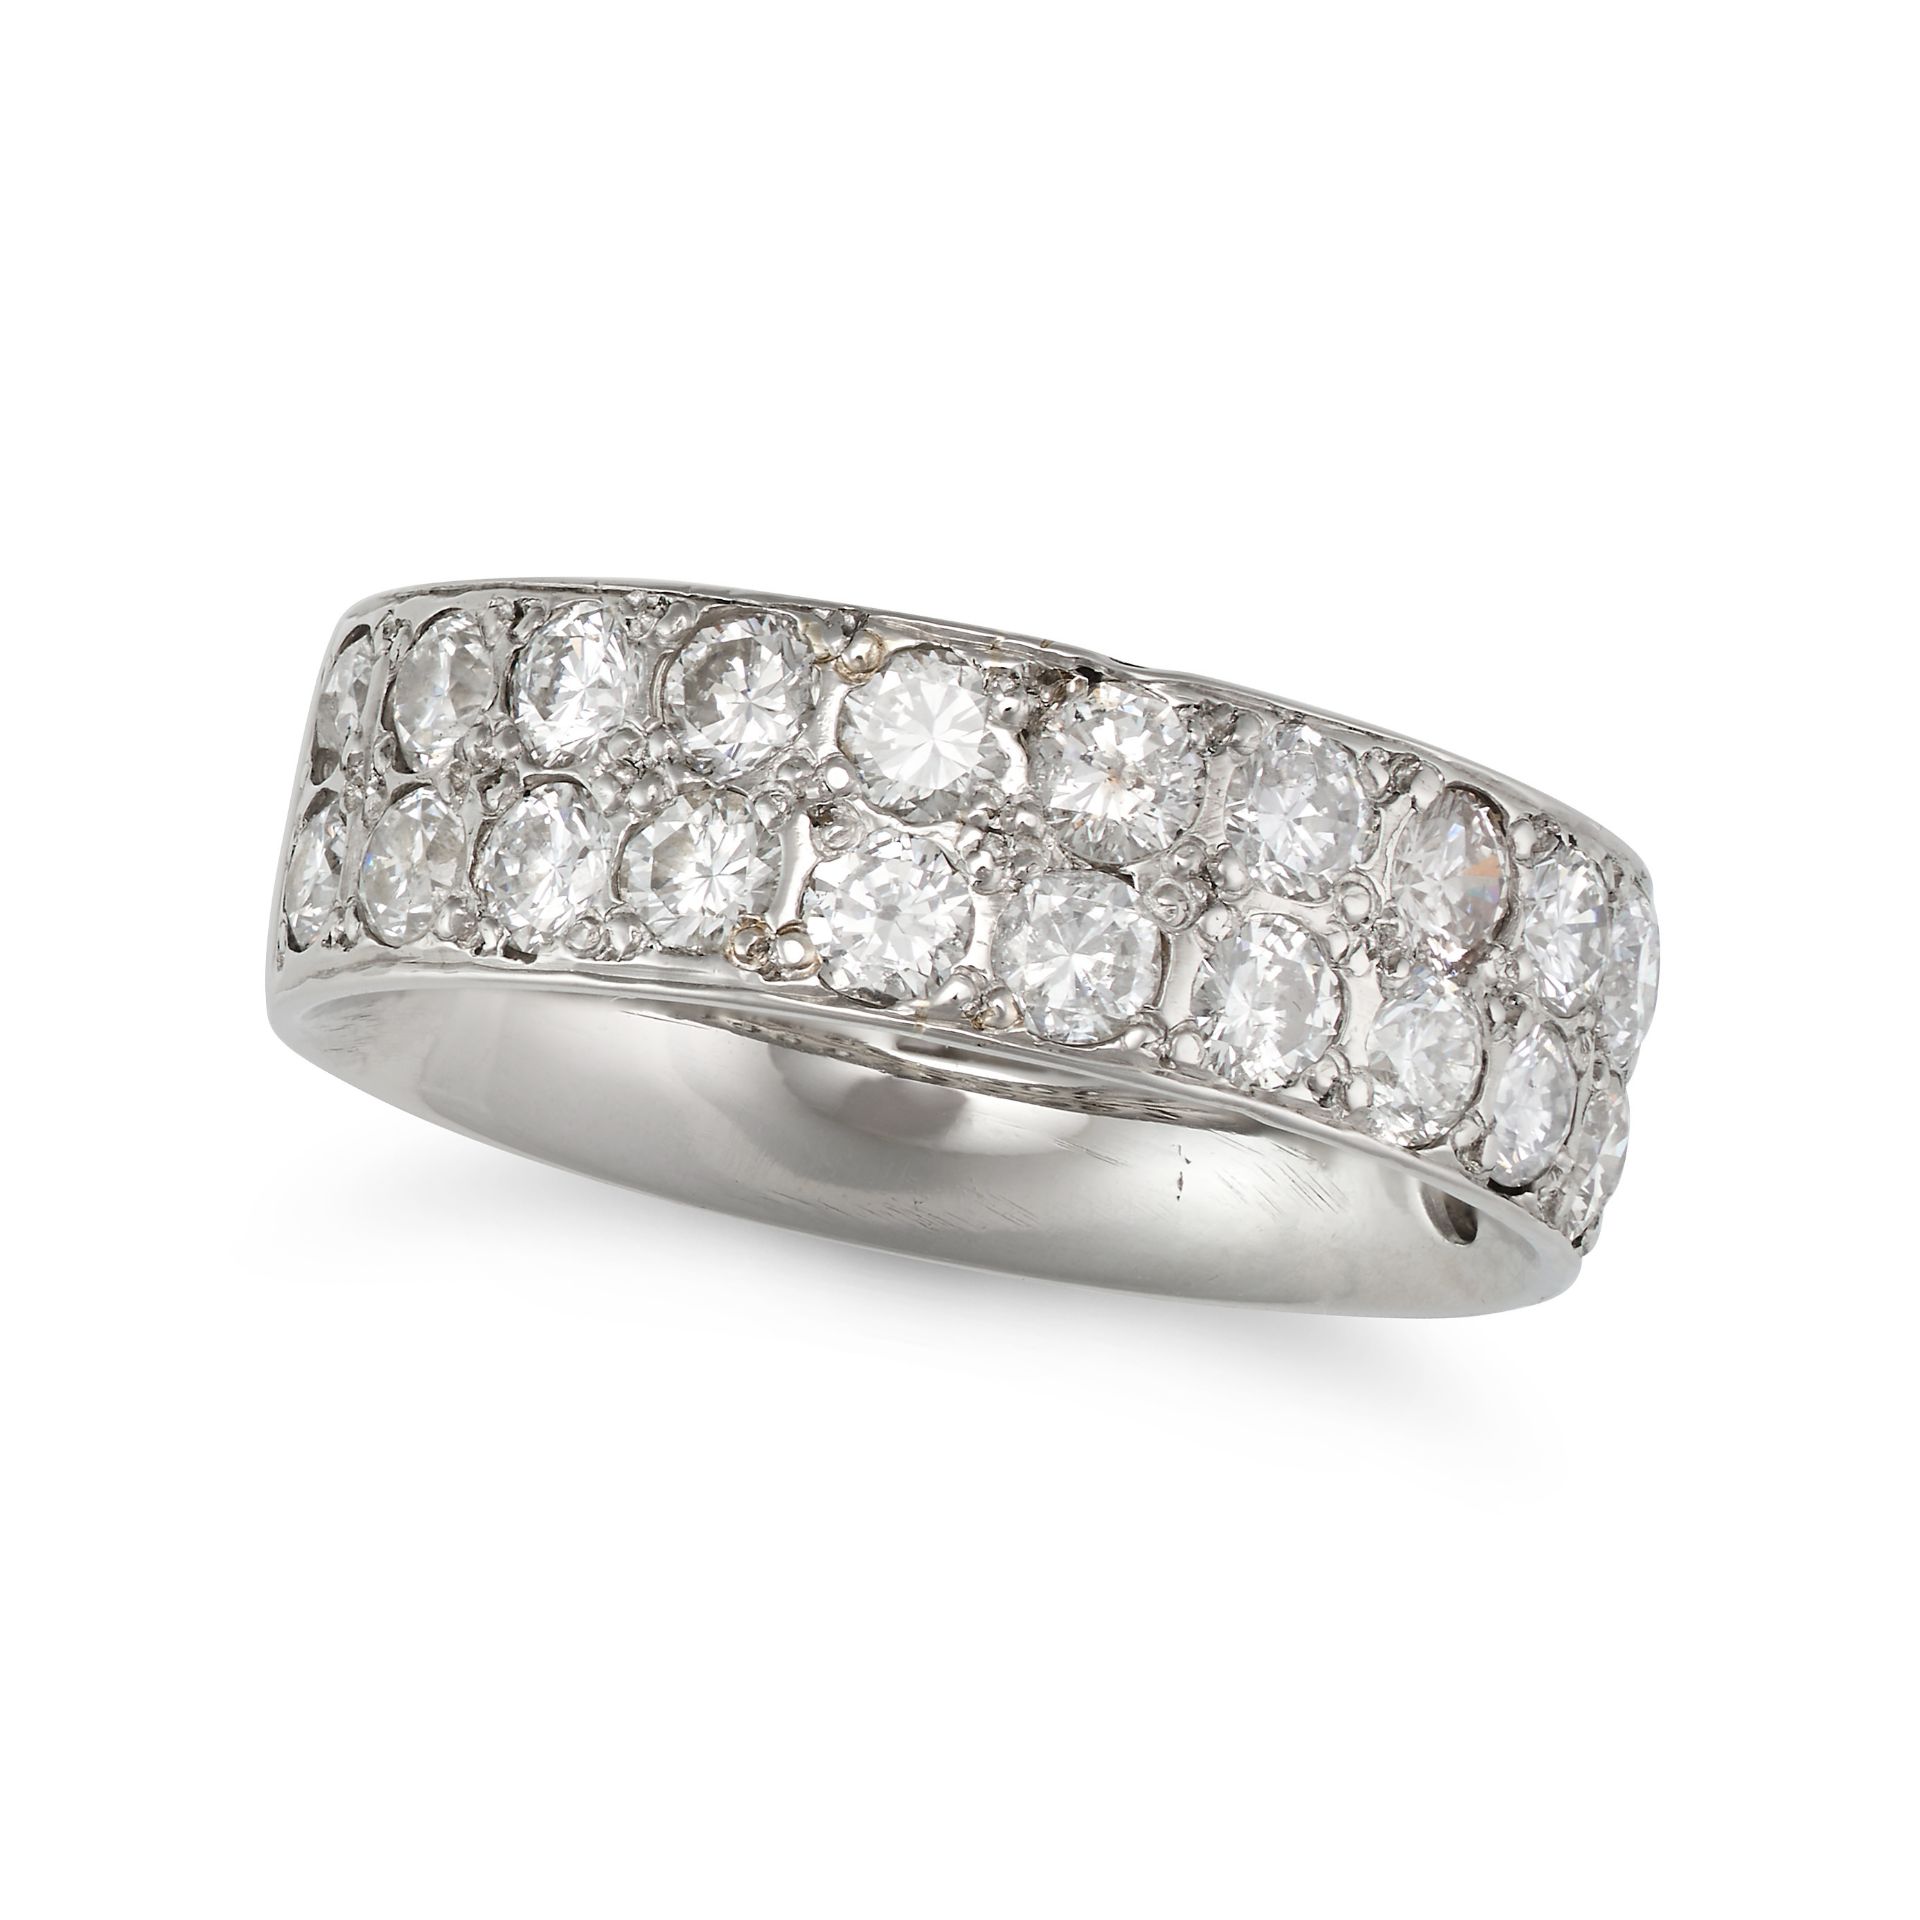 A DIAMOND HALF ETERNITY RING in platinum, set with two rows of round brilliant cut diamonds all t...